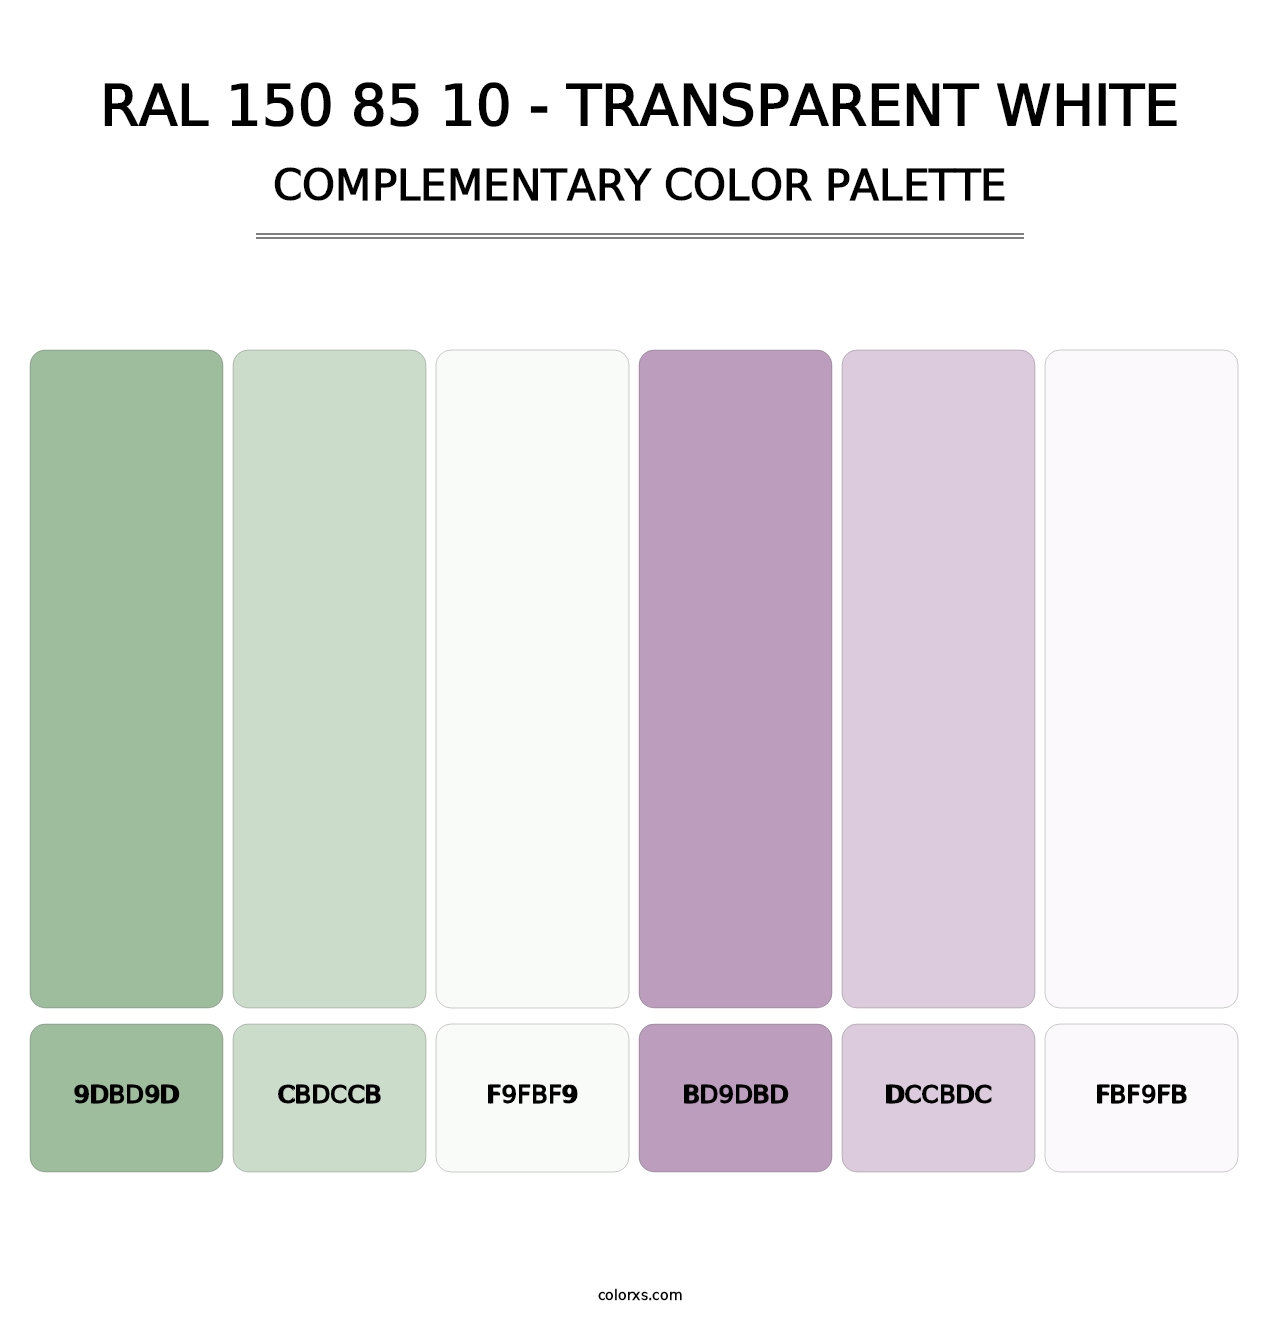 RAL 150 85 10 - Transparent White - Complementary Color Palette